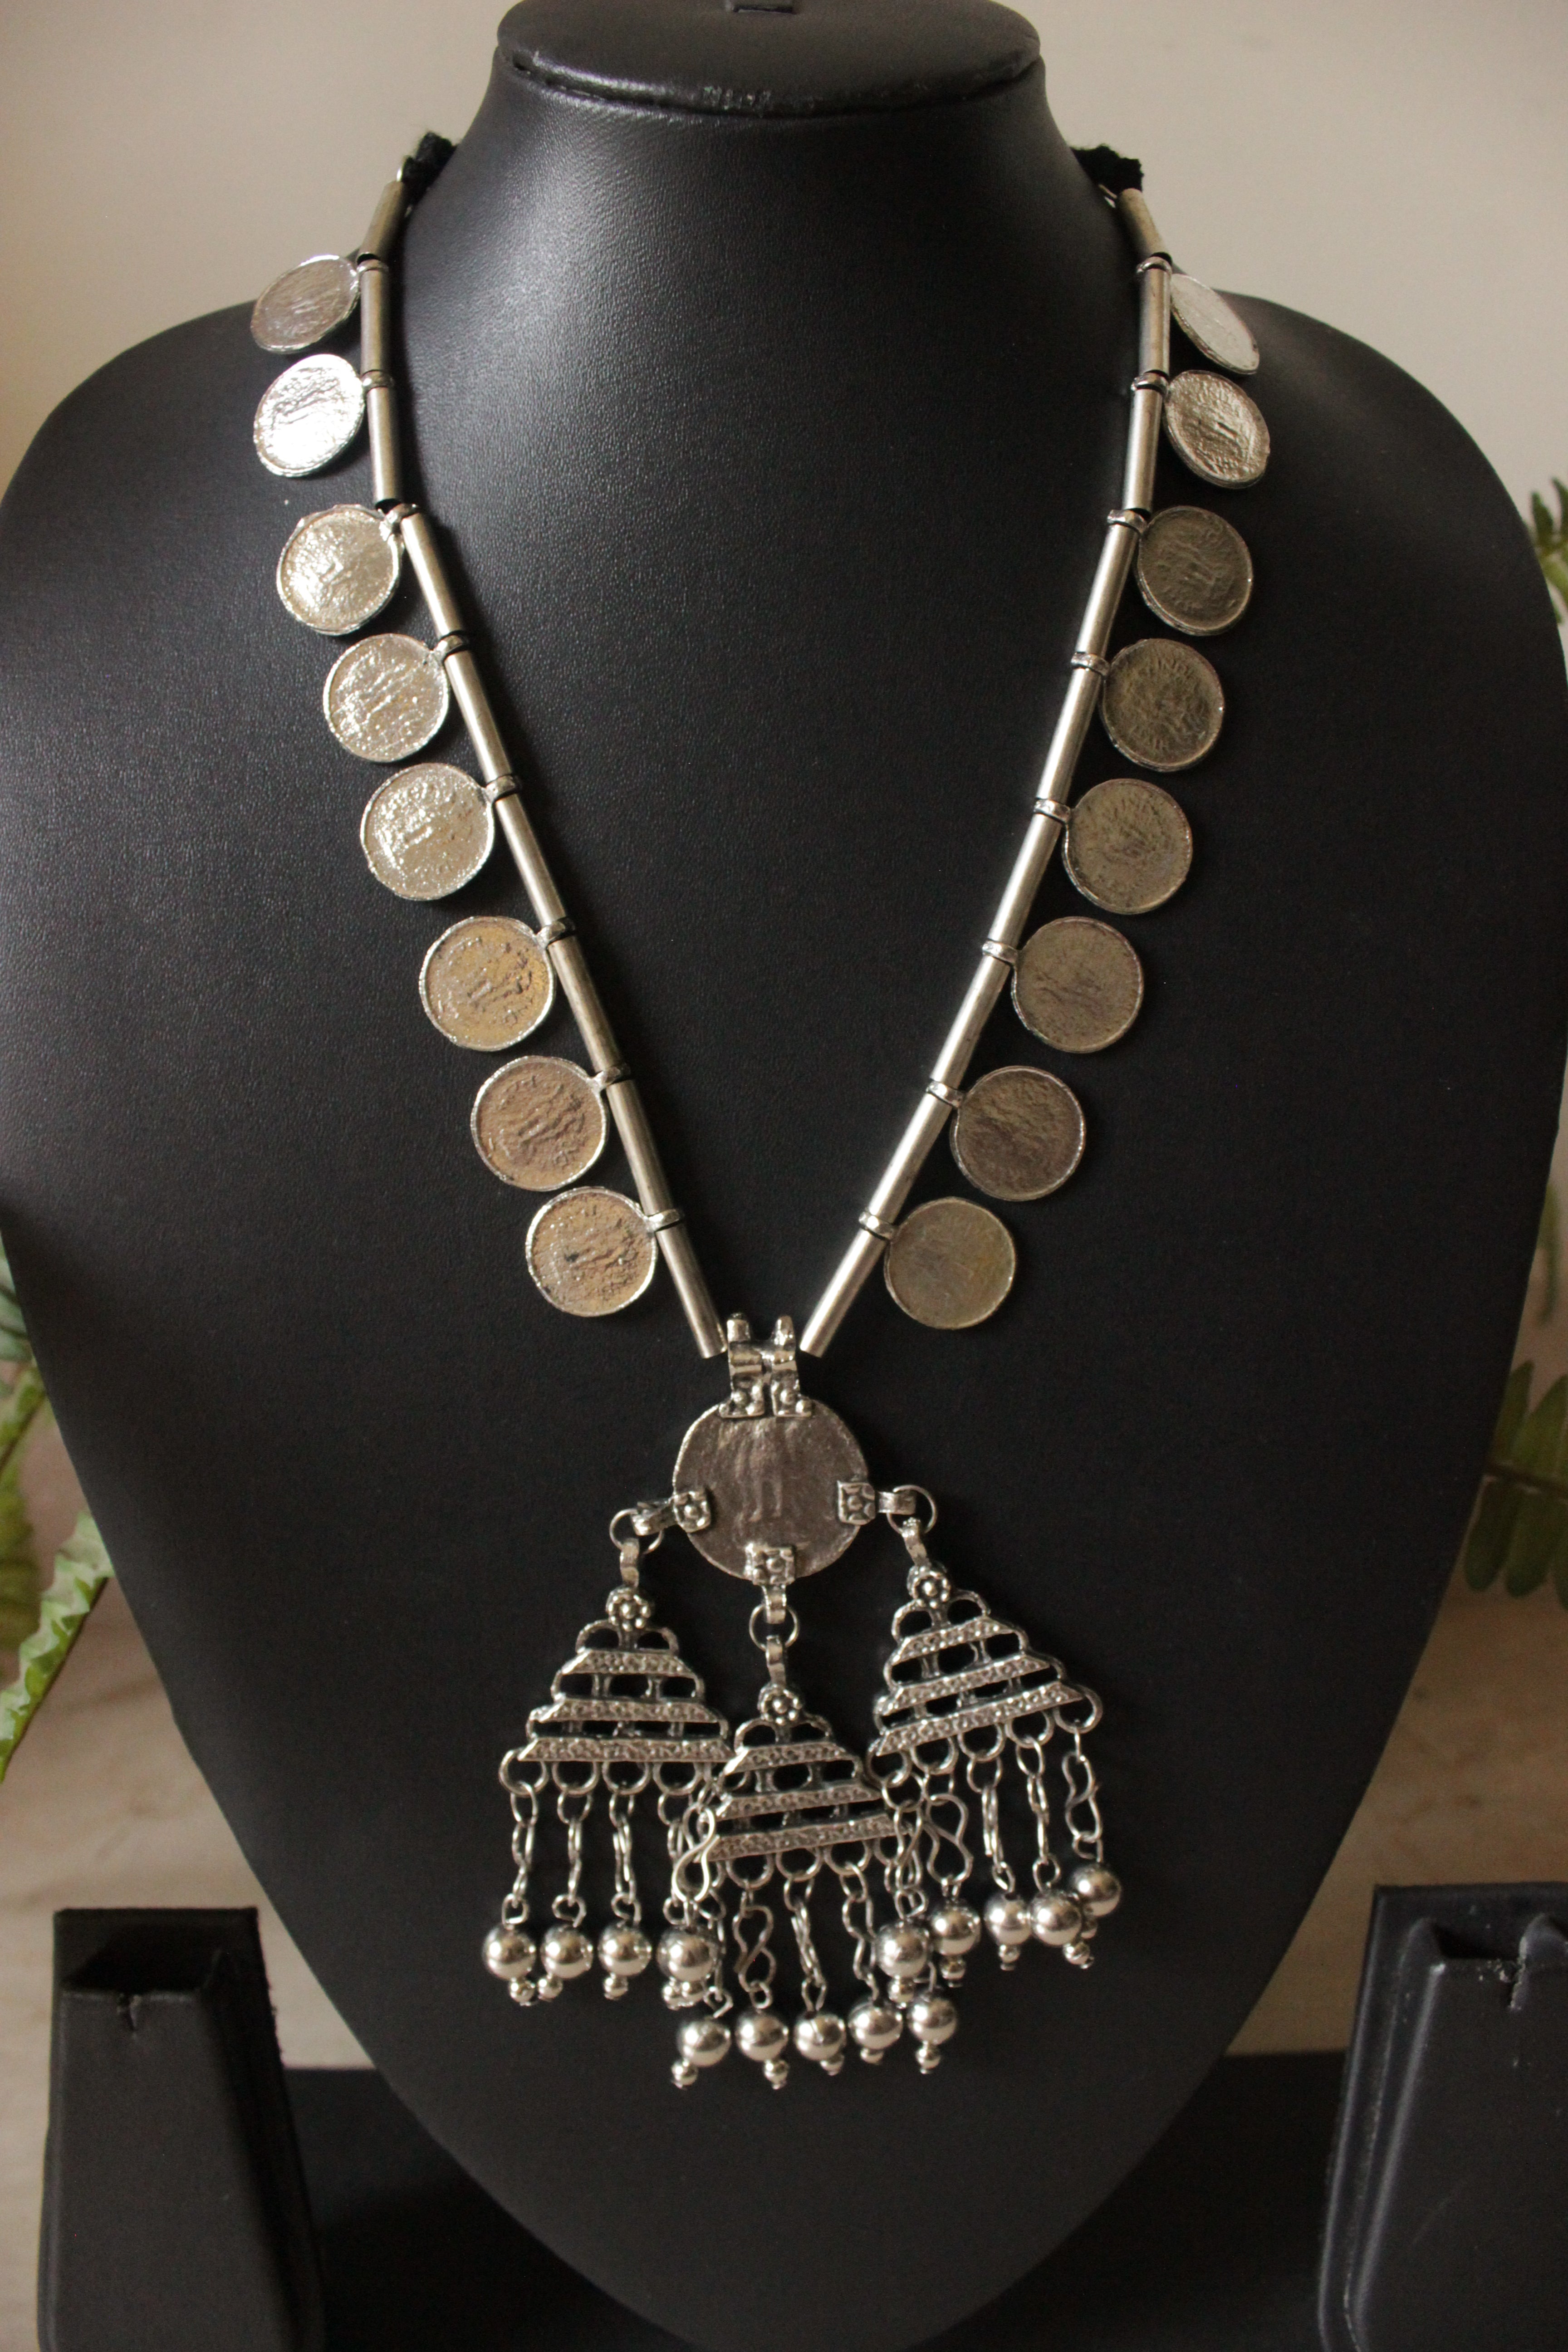 Stamped Metal Coins Adjustable Thread Closure Tribal Necklace